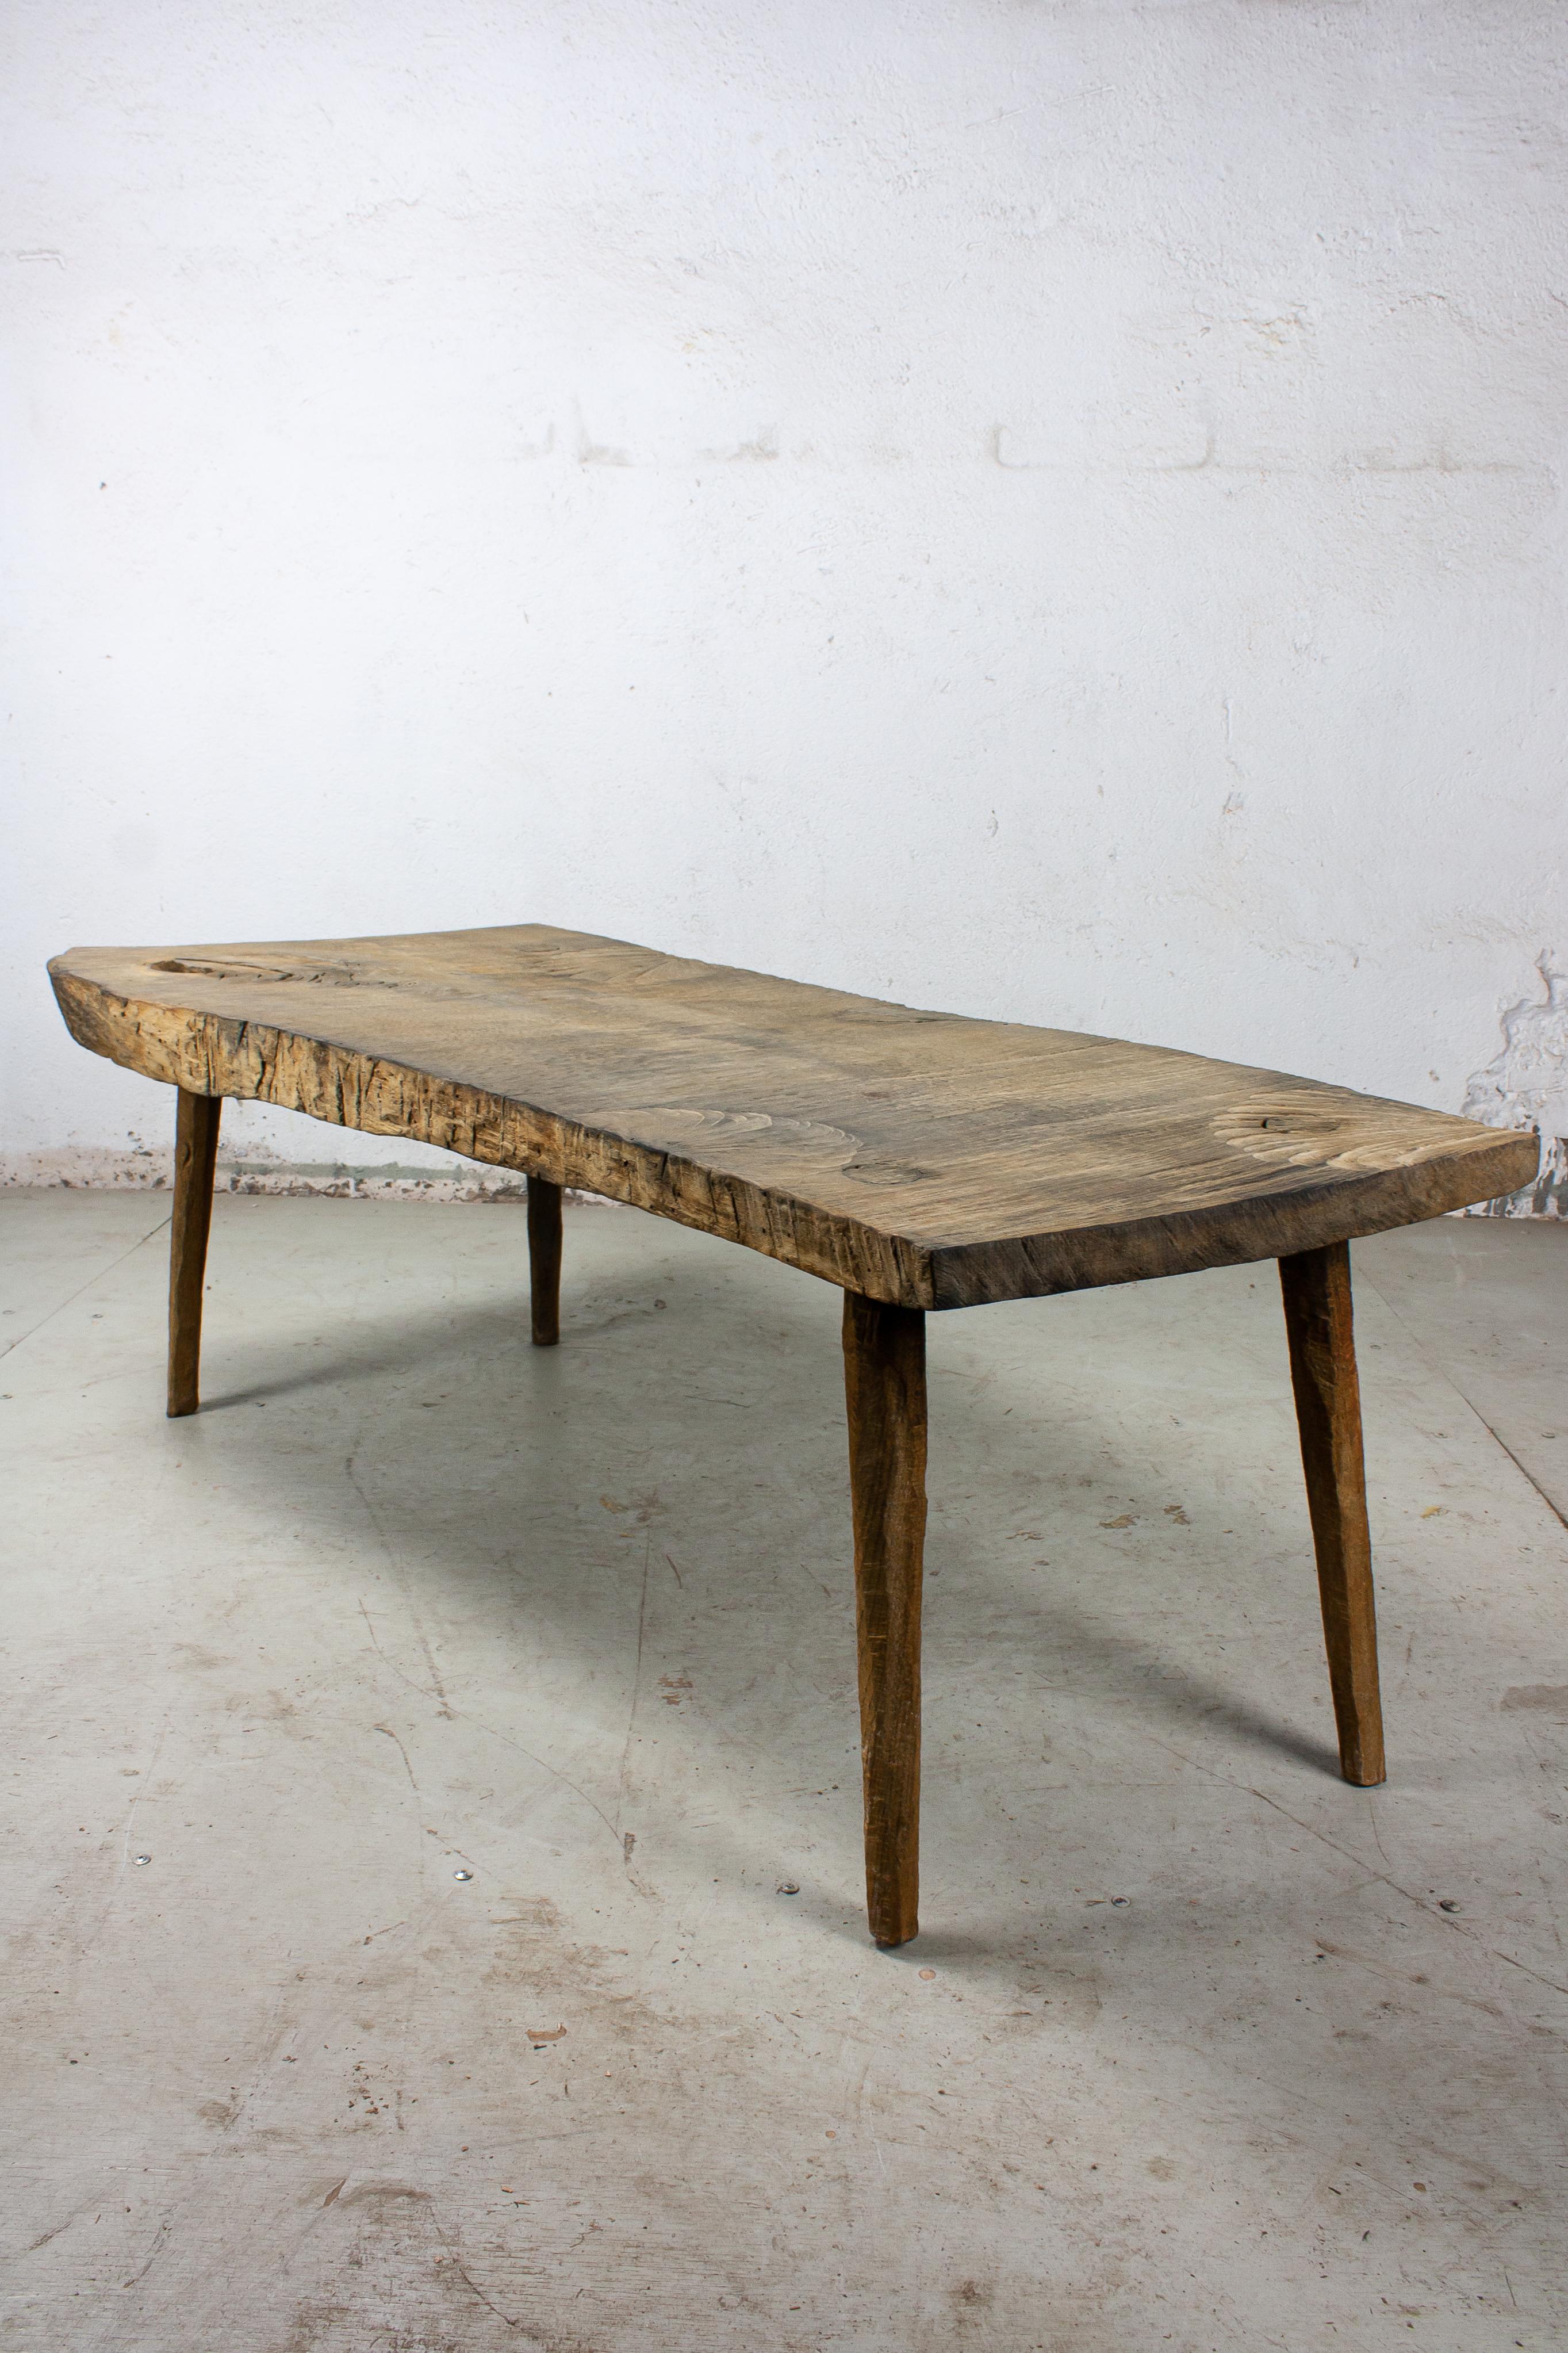 Small table made of solid oak (+ linseed oil)
Measures: 50 x 123 x 45 cm

SÓHA design studio conceives and produces furniture design and decorative objects in solid oak in an authentic style. Inspiration to create all these items comes from the